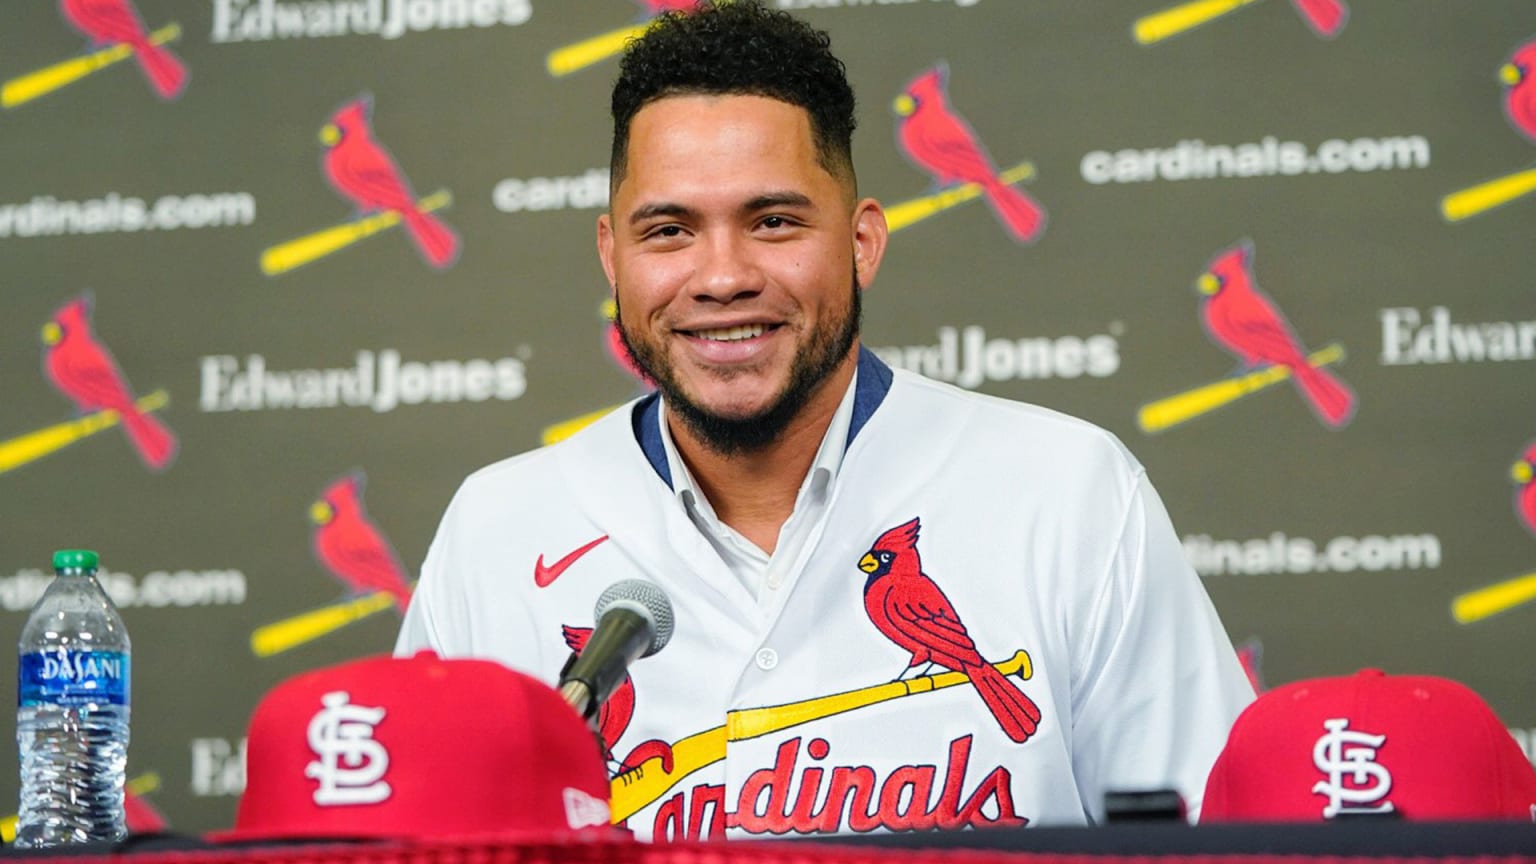 Willson Contreras smiles at his introductory Cardinals press conference